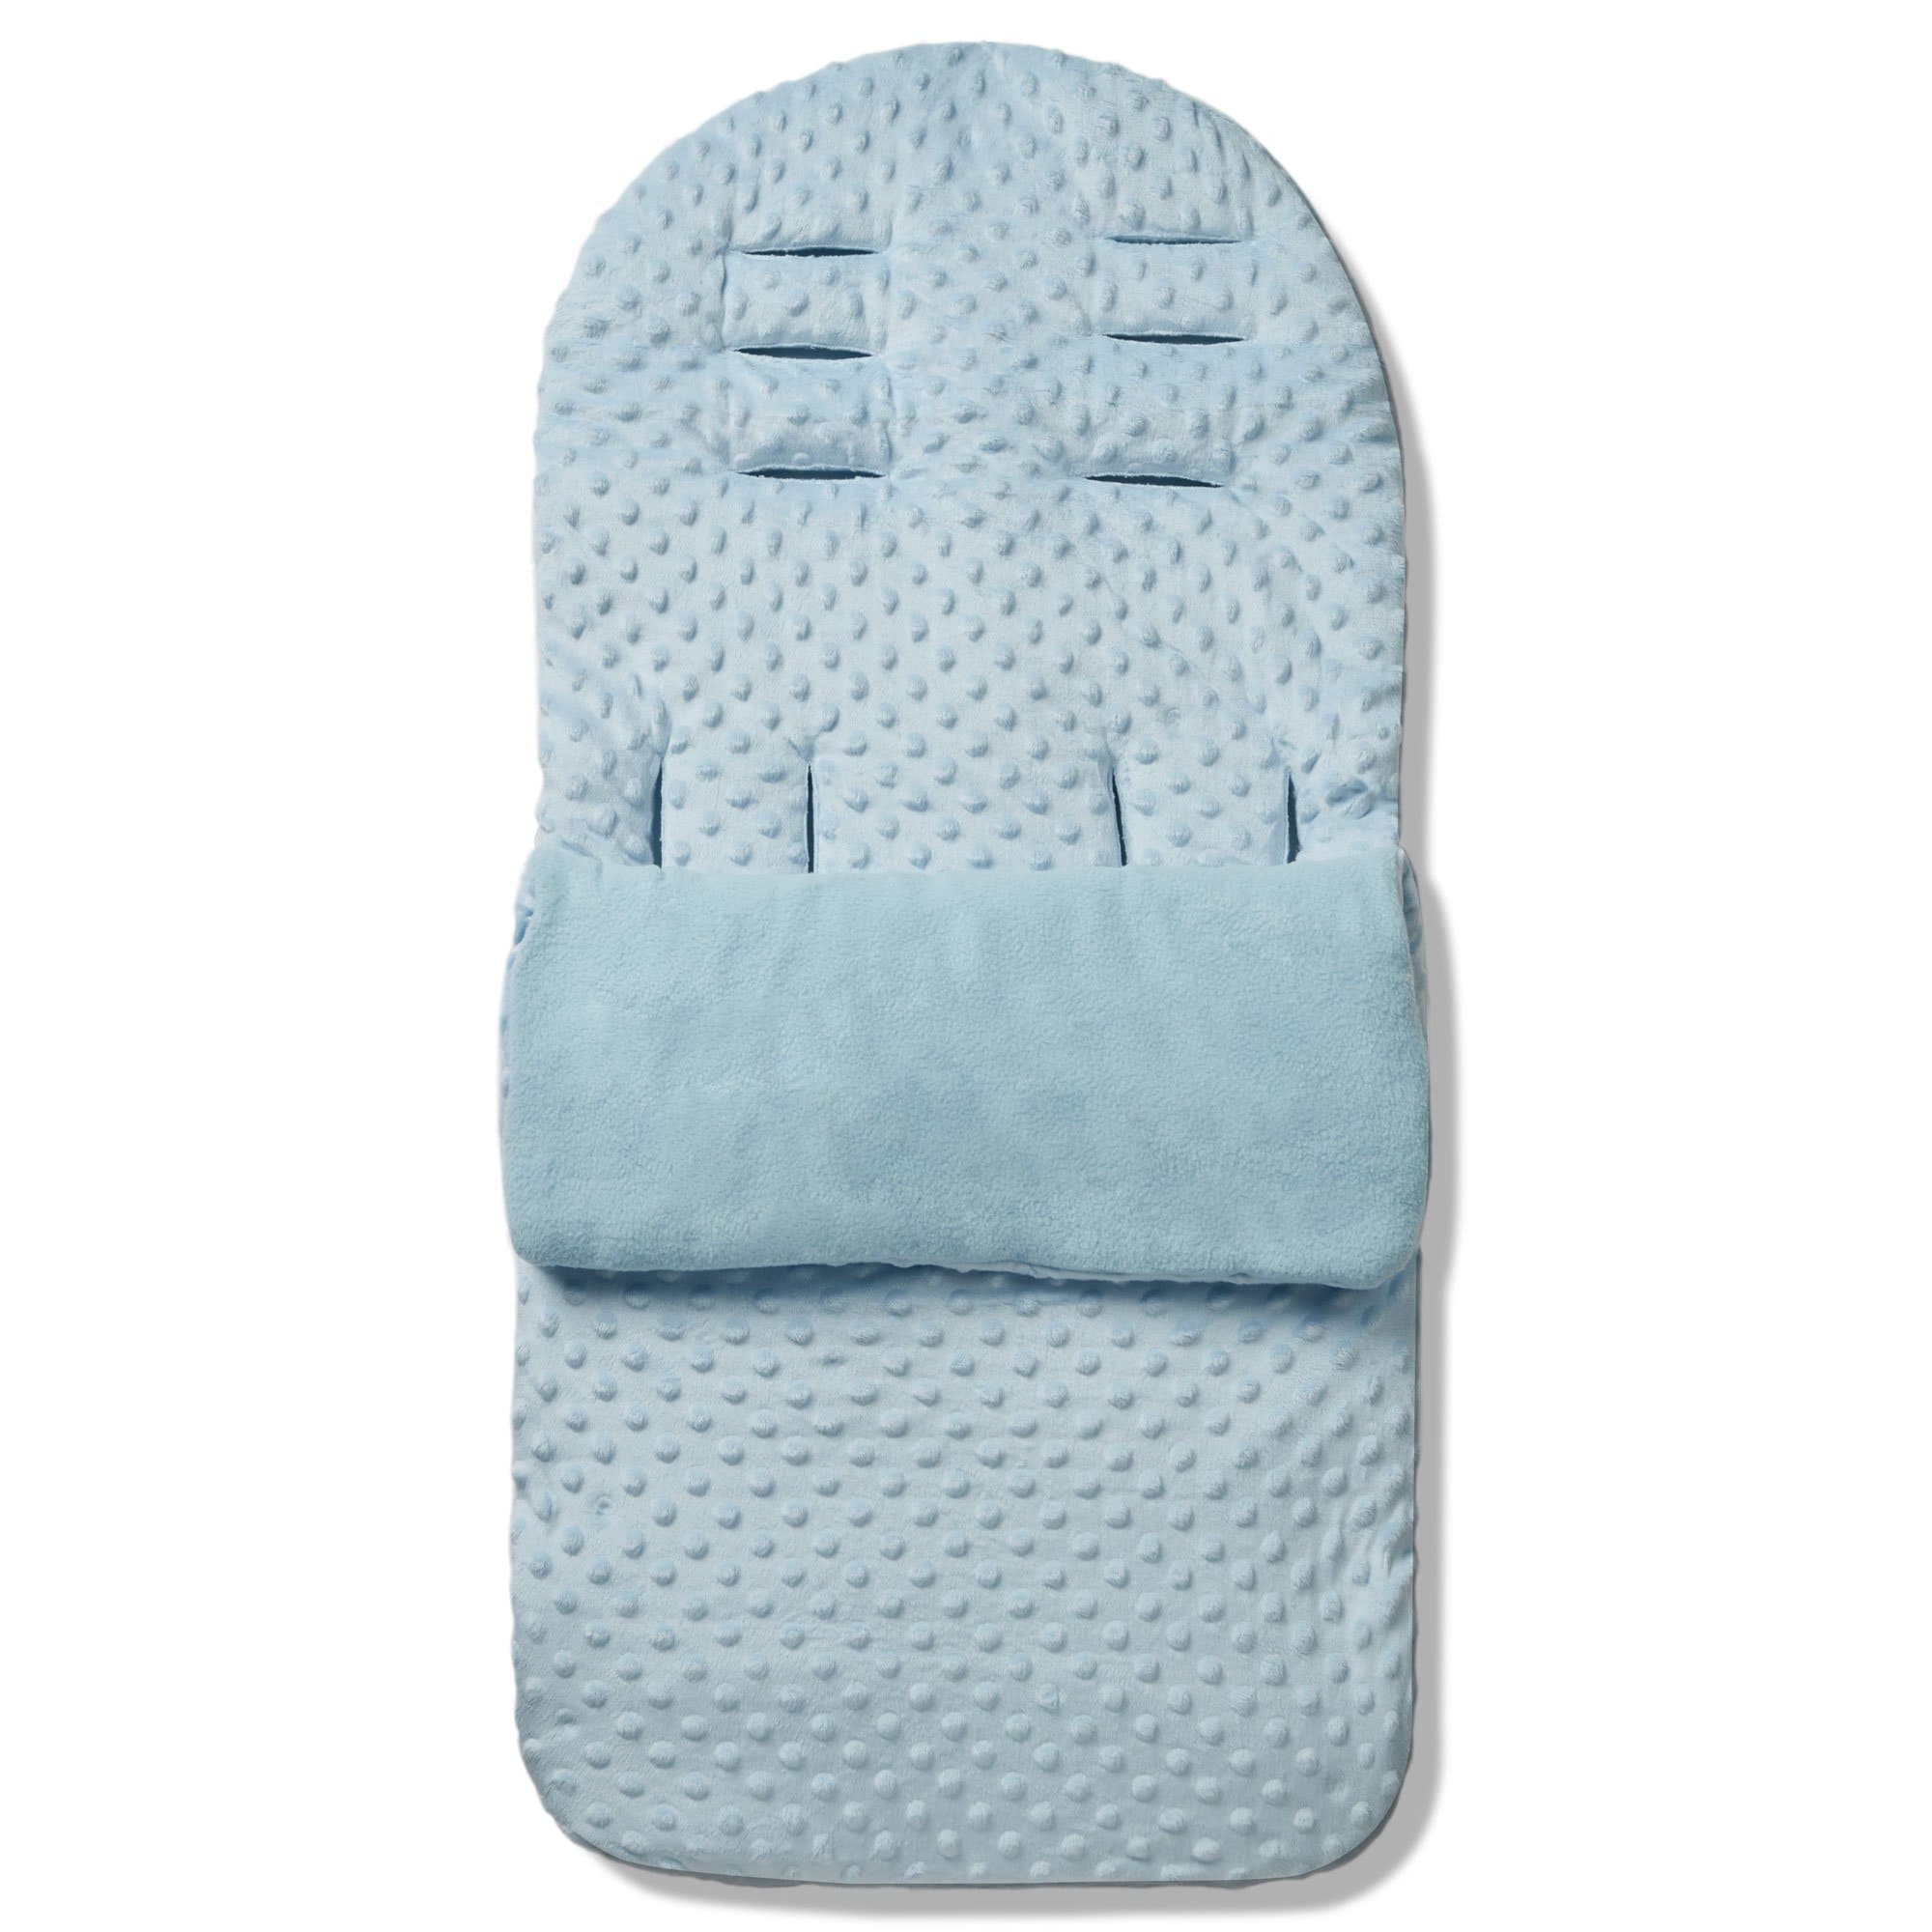 Dimple Footmuff / Cosy Toes Compatible with Hesba - Blue / Fits All Models | For Your Little One